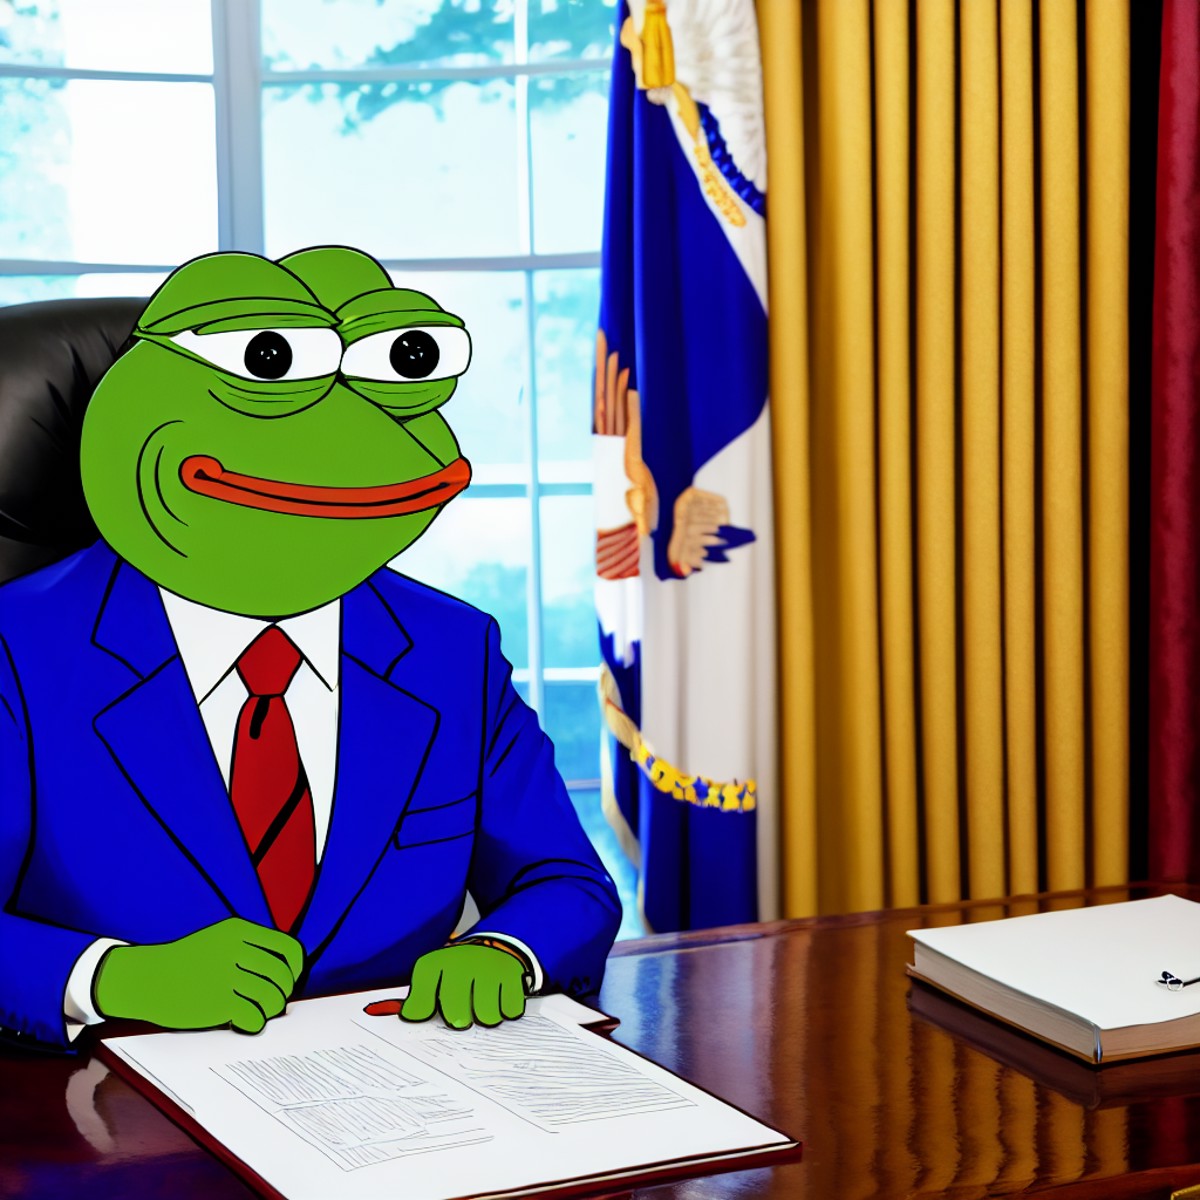 cartoon PepeFrog dressed in a suit as president of the united states in the oval office <lora:PepeFrog:0.7>